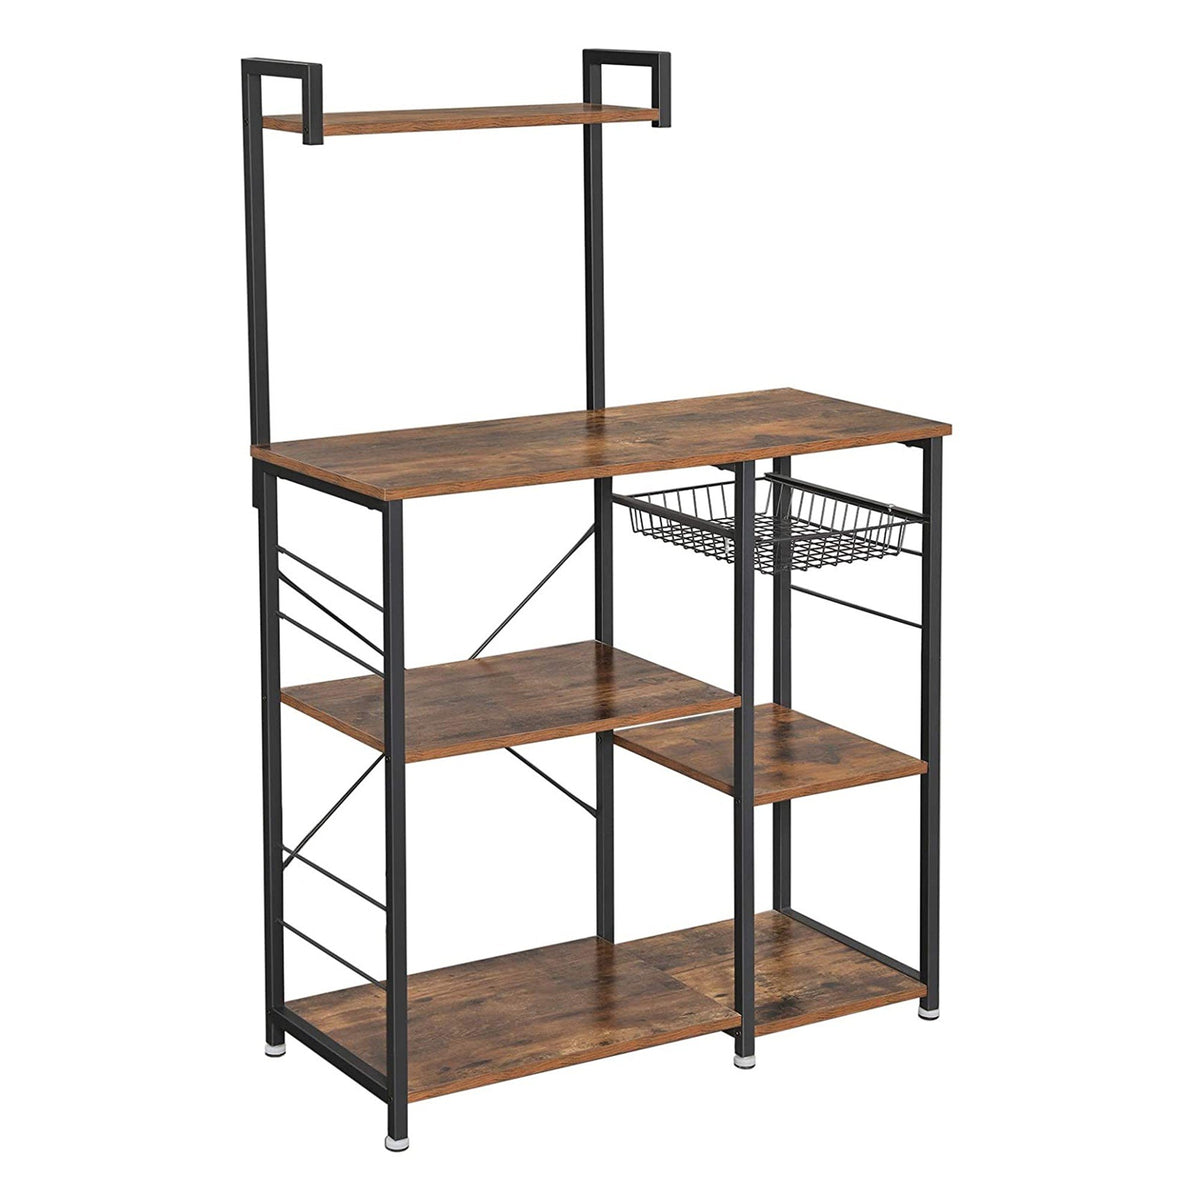 Wooden Utility Storage with 5 Shelves and Wire Basket, Brown and Black - BM221272